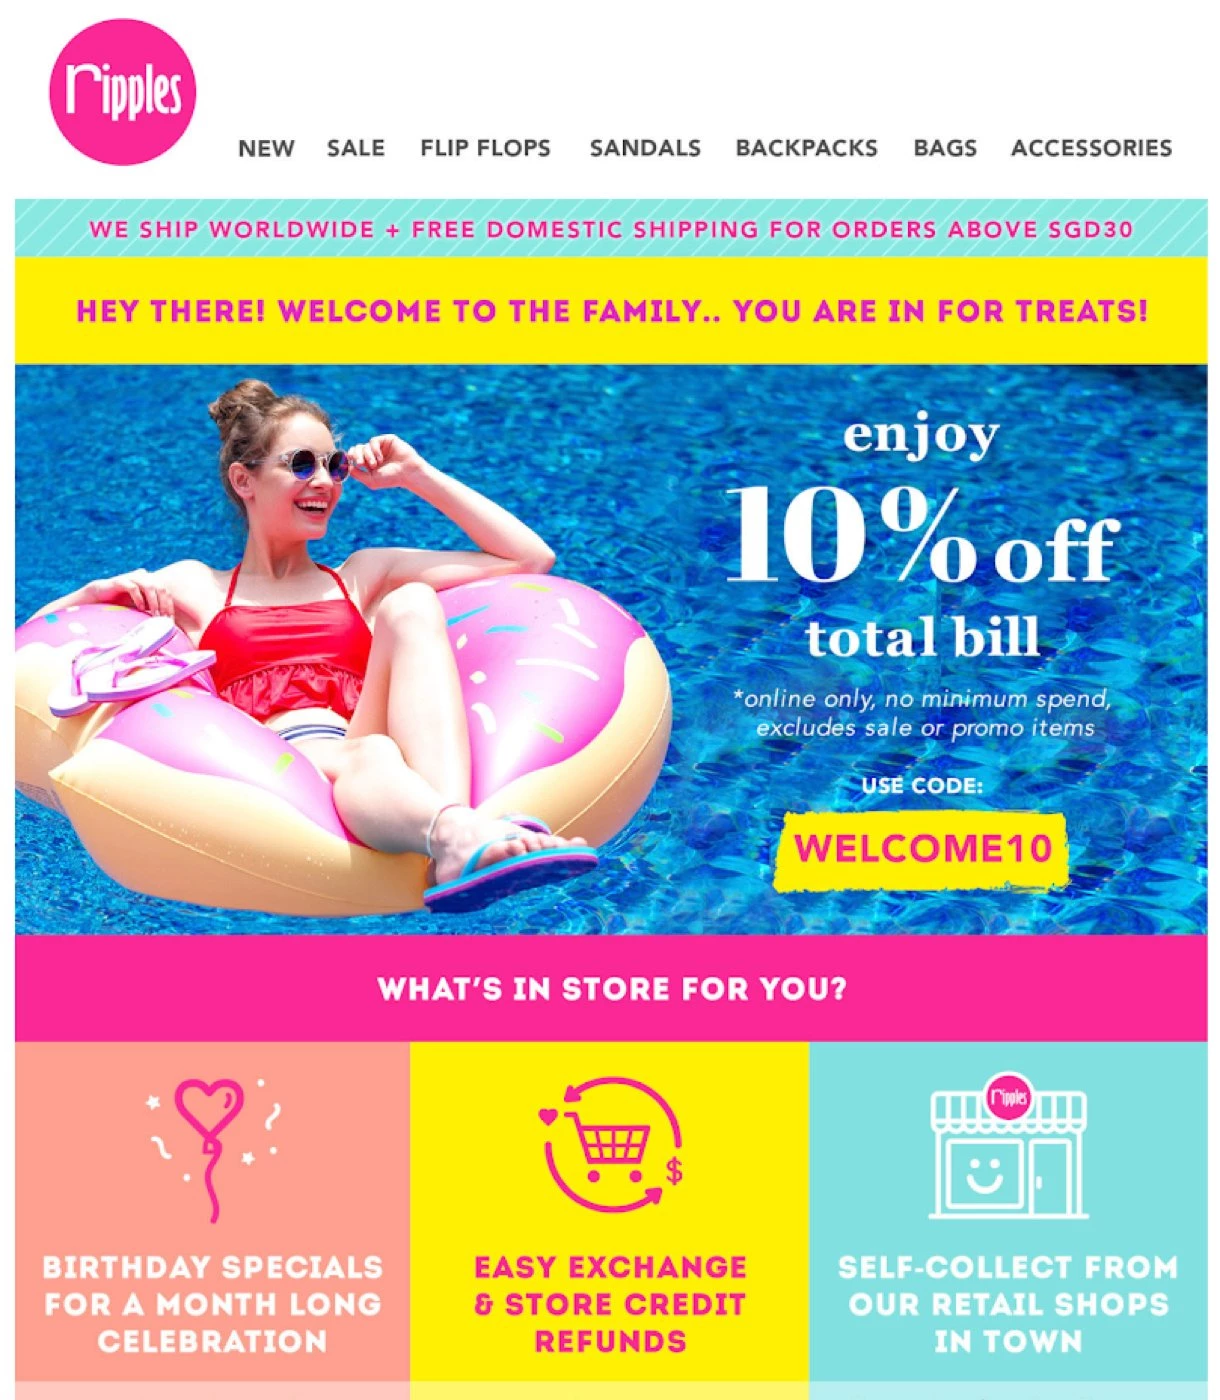 Ripples welcome email example girl floating in a pool